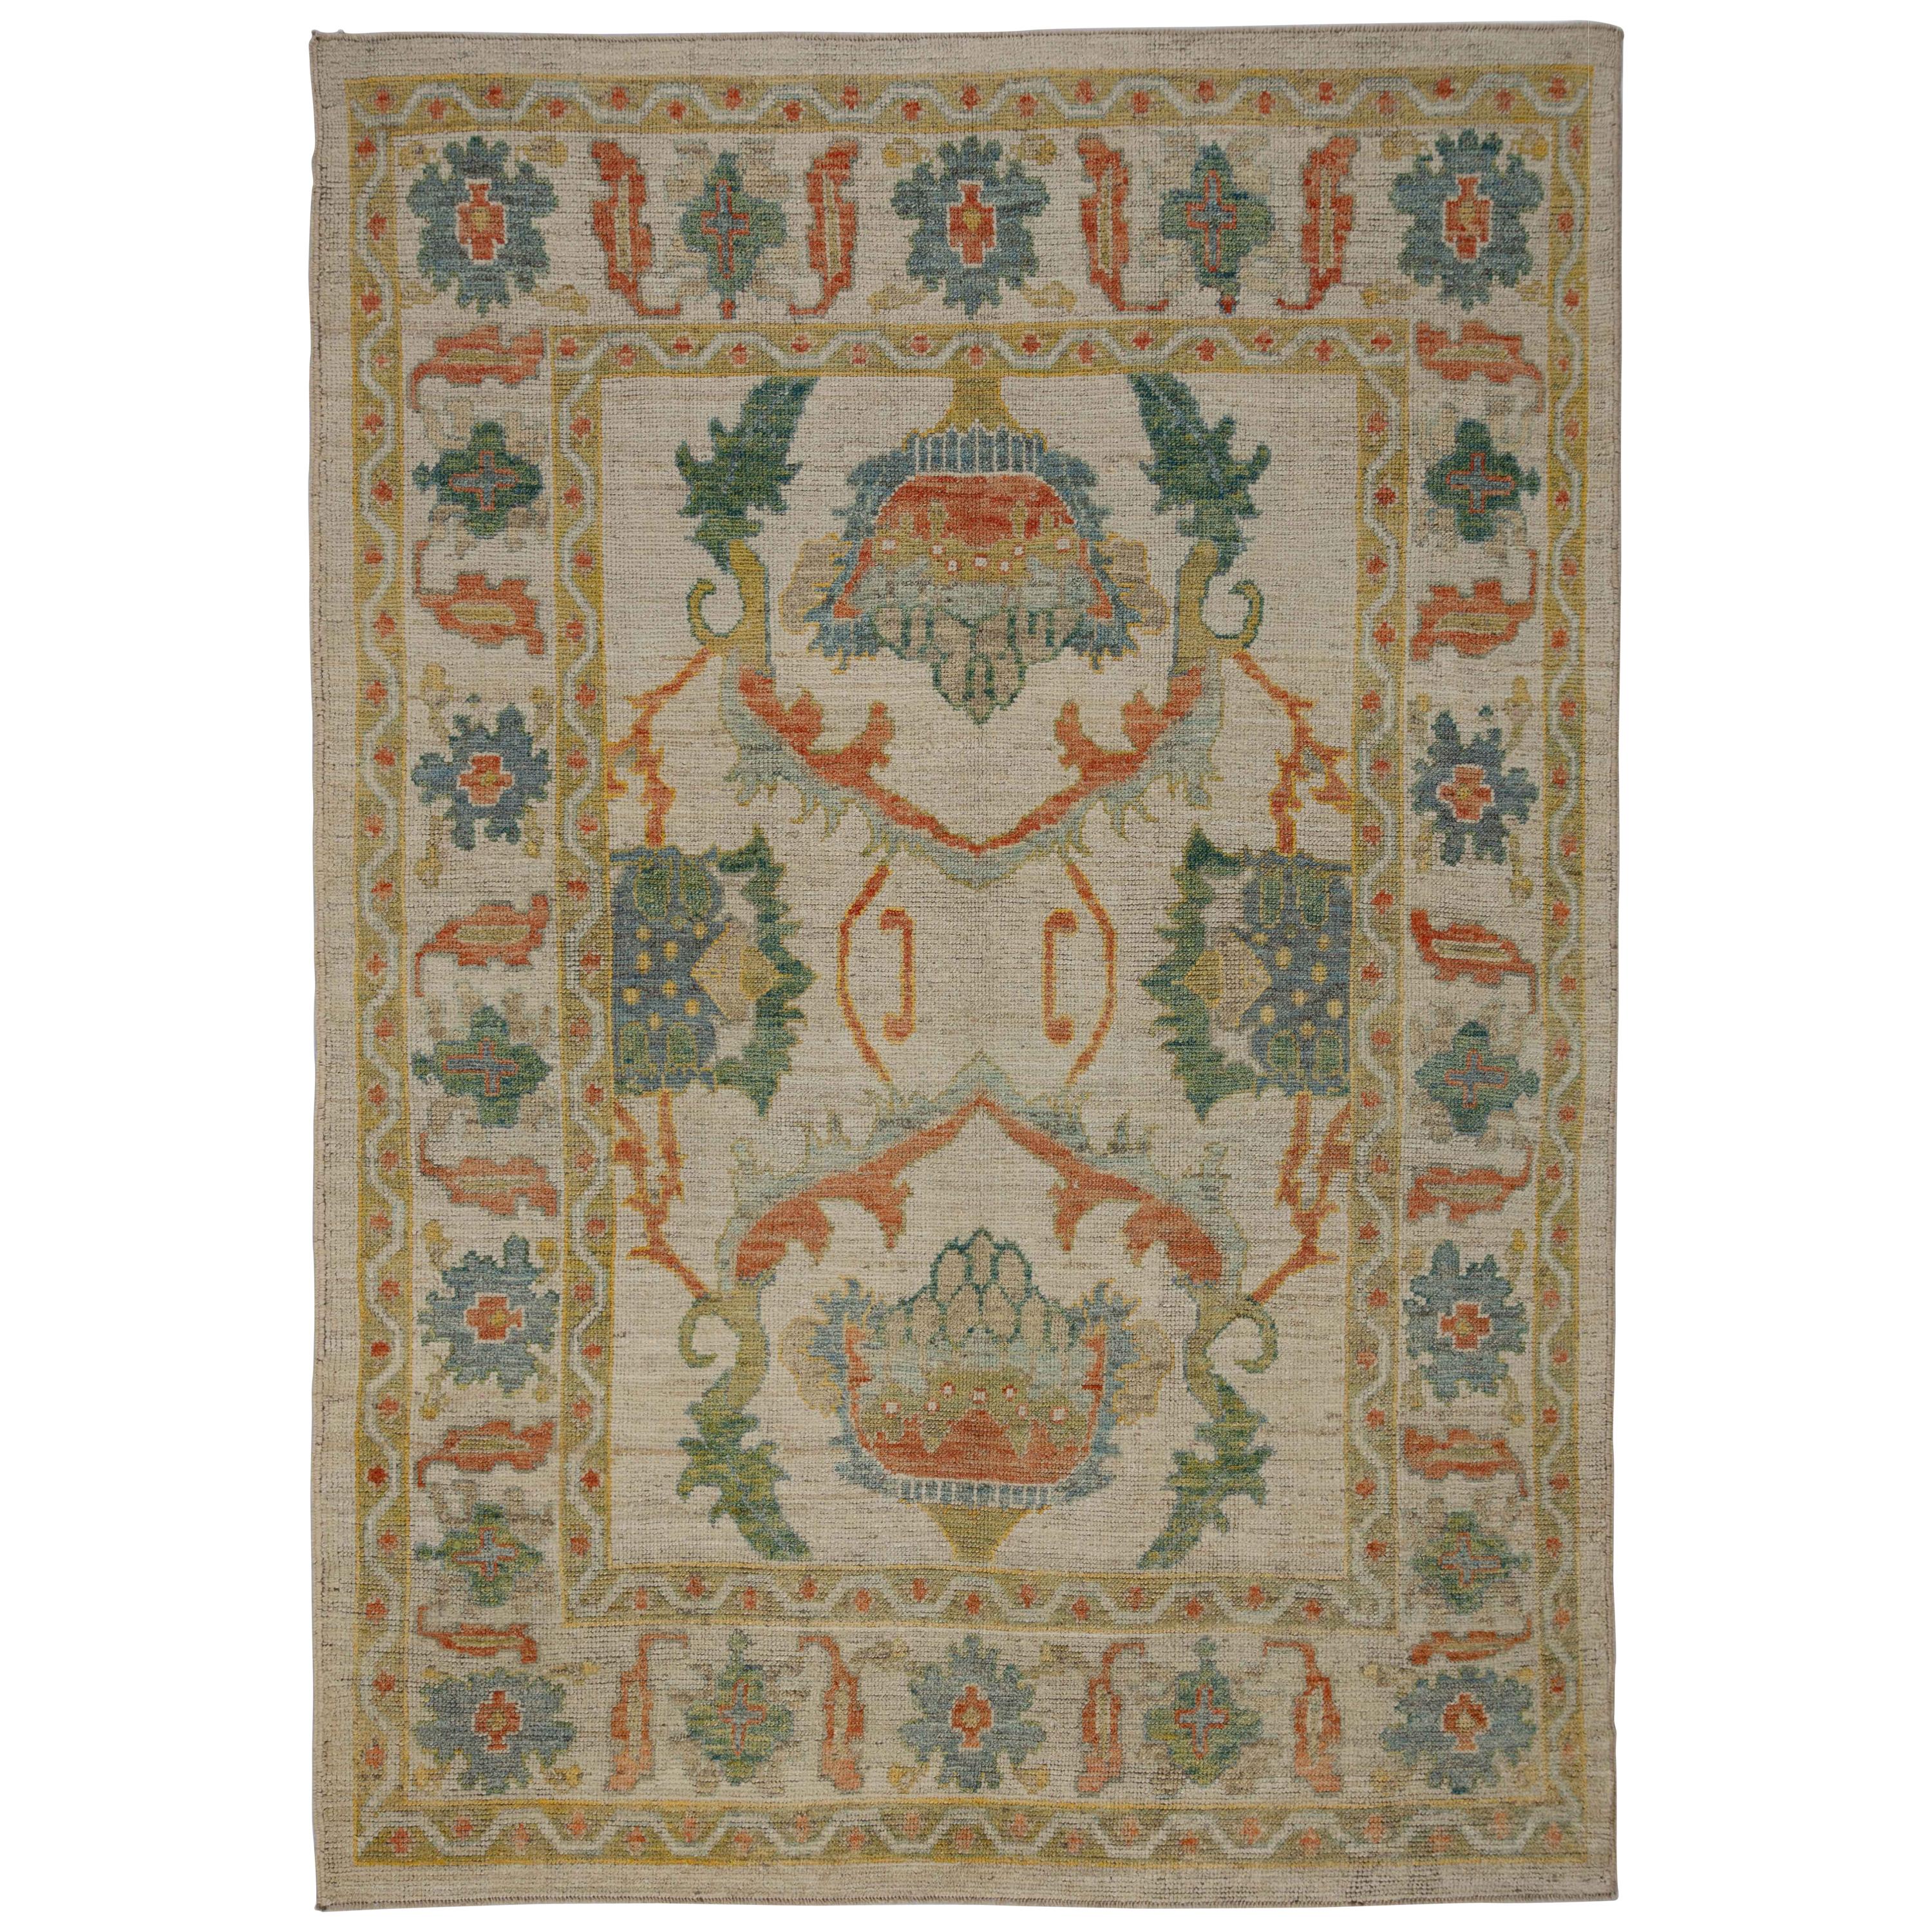 Modern Turkish Oushak Rug with Green and Rust Flower Patterns on Beige Field